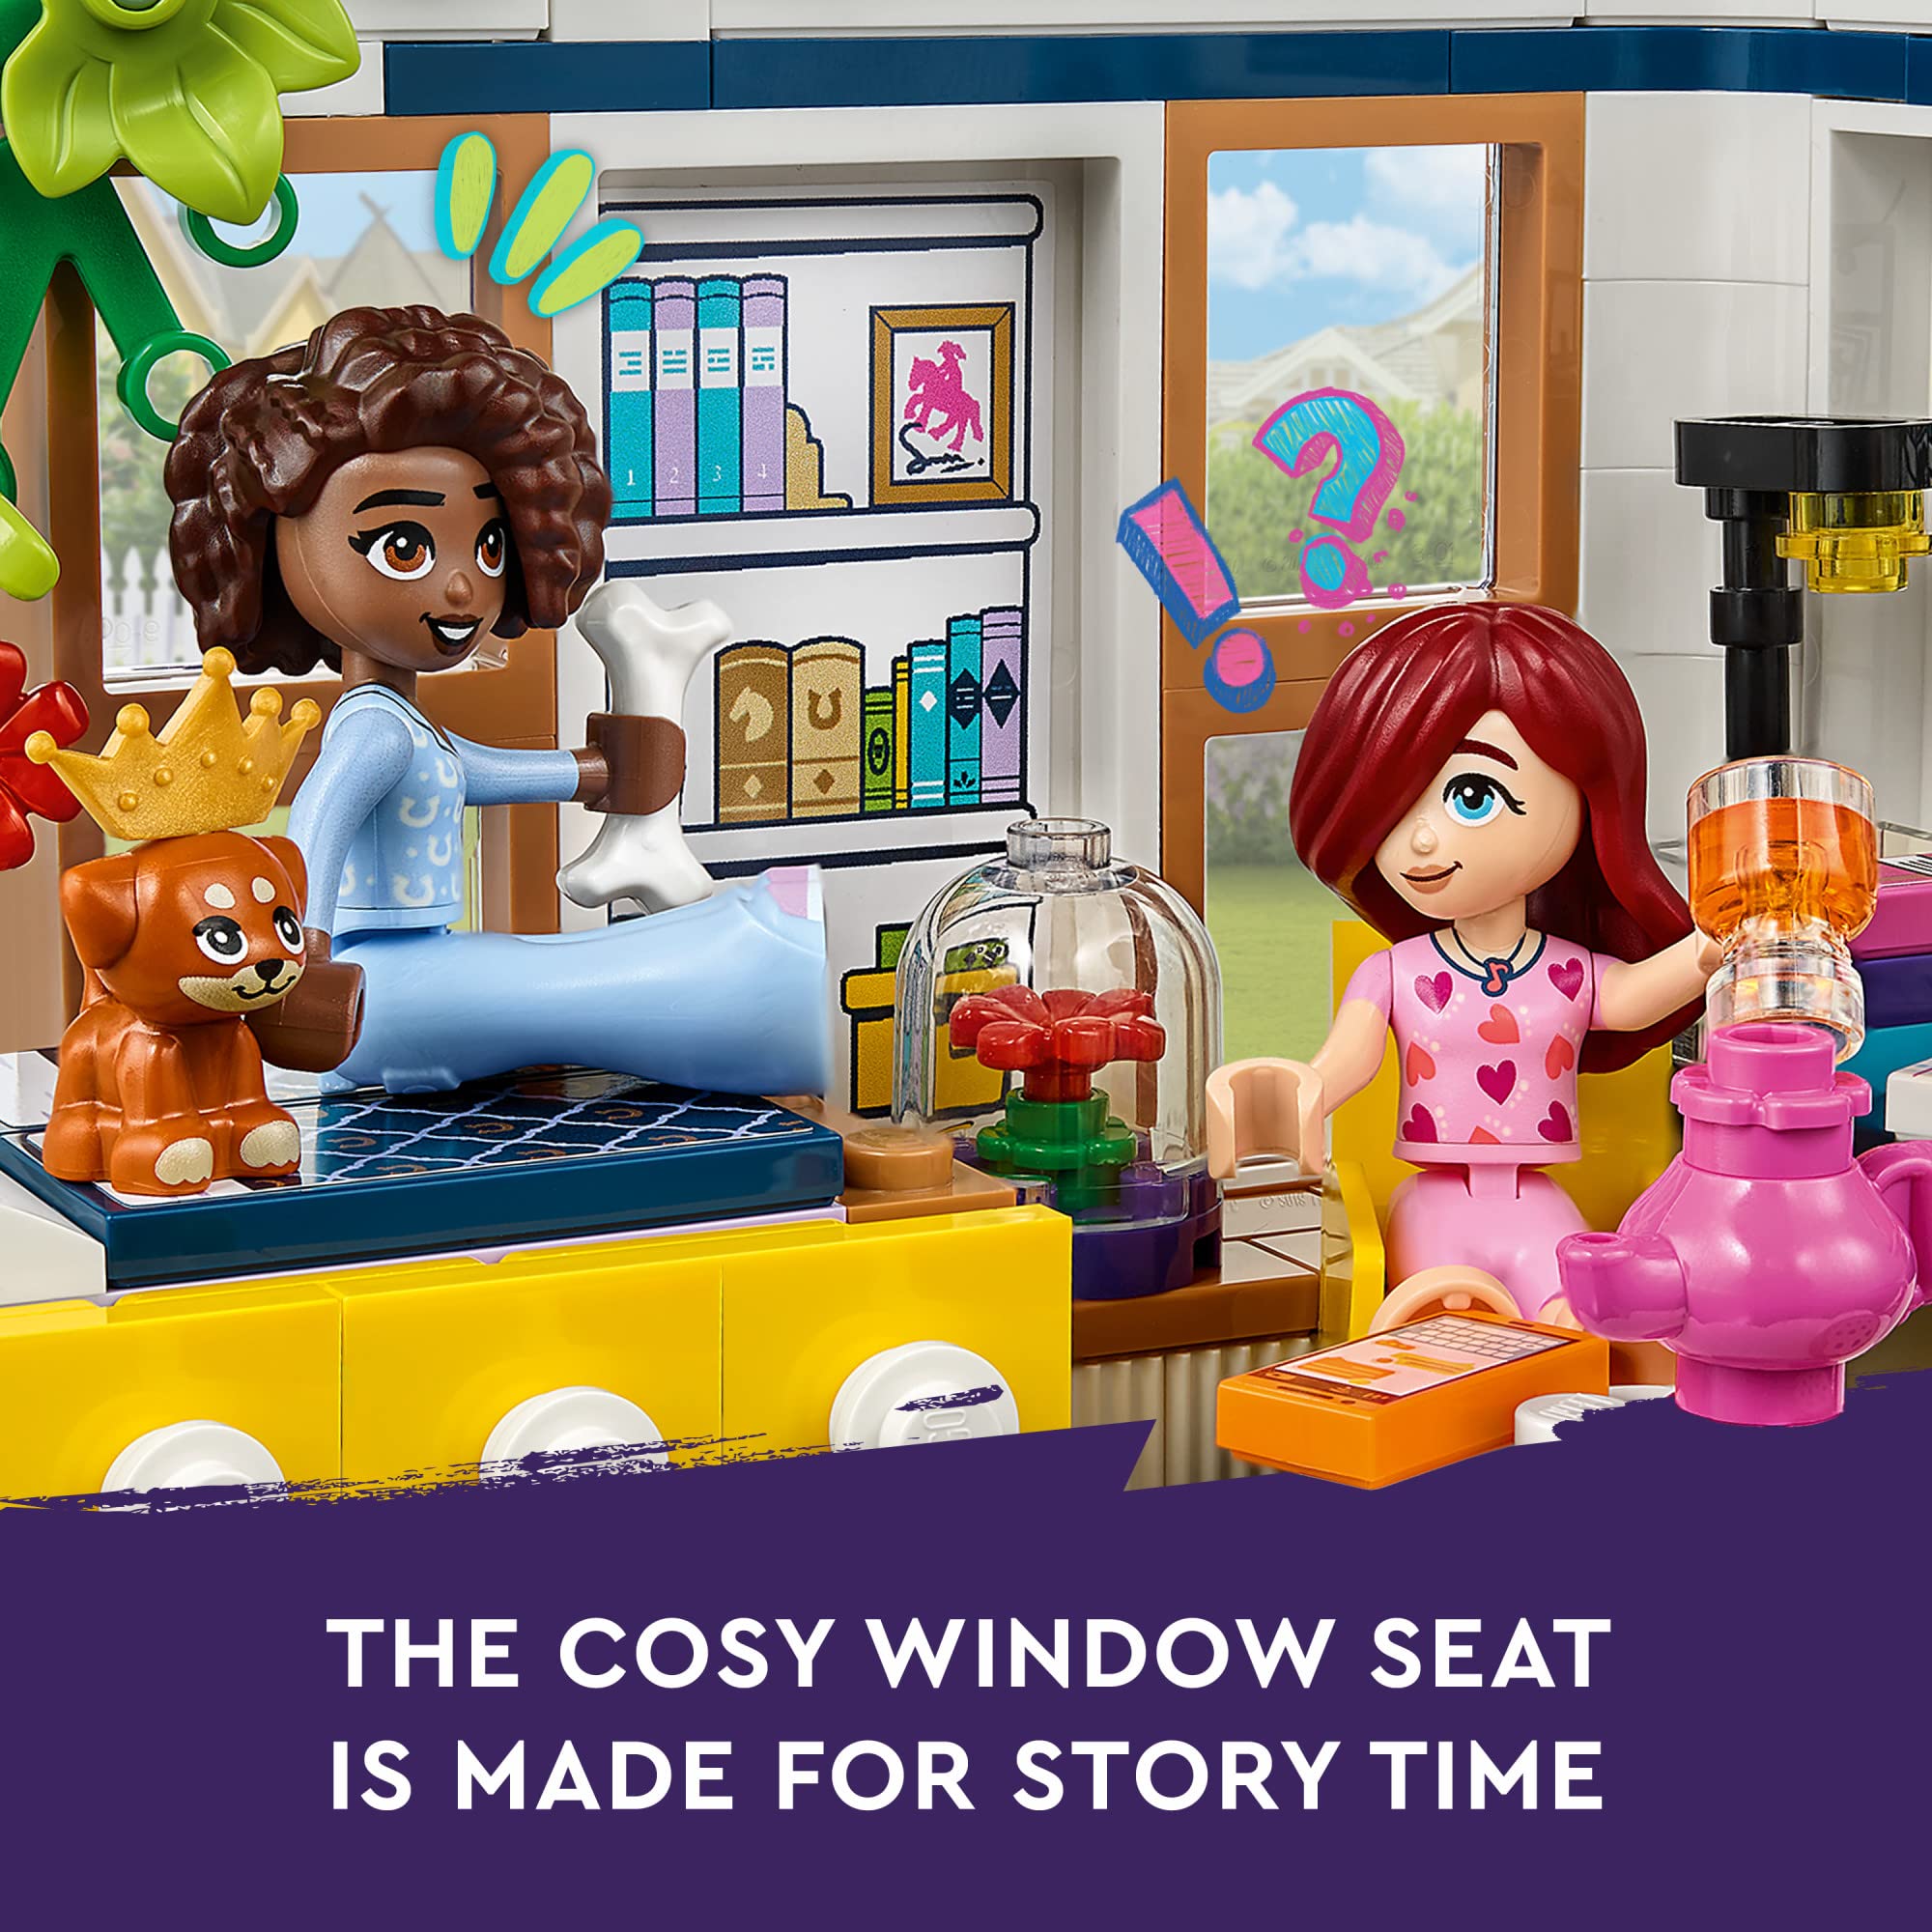 LEGO Friends Aliya's Room 41740 Building Set - Collectible Toy Set with Paisley and Aliya Mini-Doll, Puppy Figure, Mini Sleepover Party Bedroom Playset, Great Gift for Girls, Boys, and Kids Ages 6+